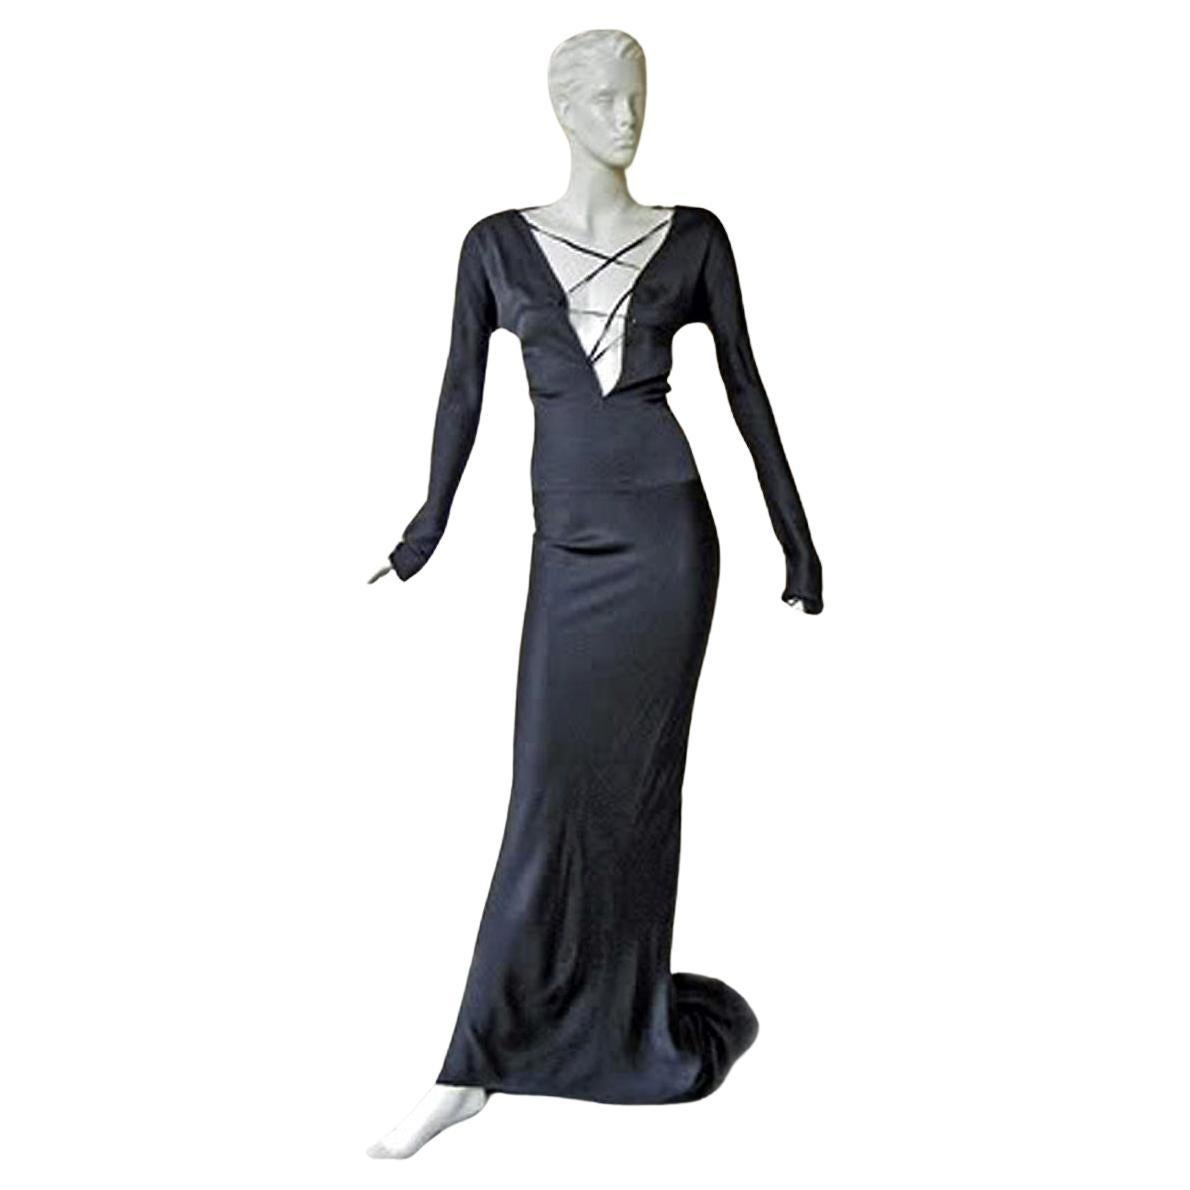 Gucci by Tom Ford 2002 Helen Hunt Dress Gown Worn on Red Carpet NWT! For Sale